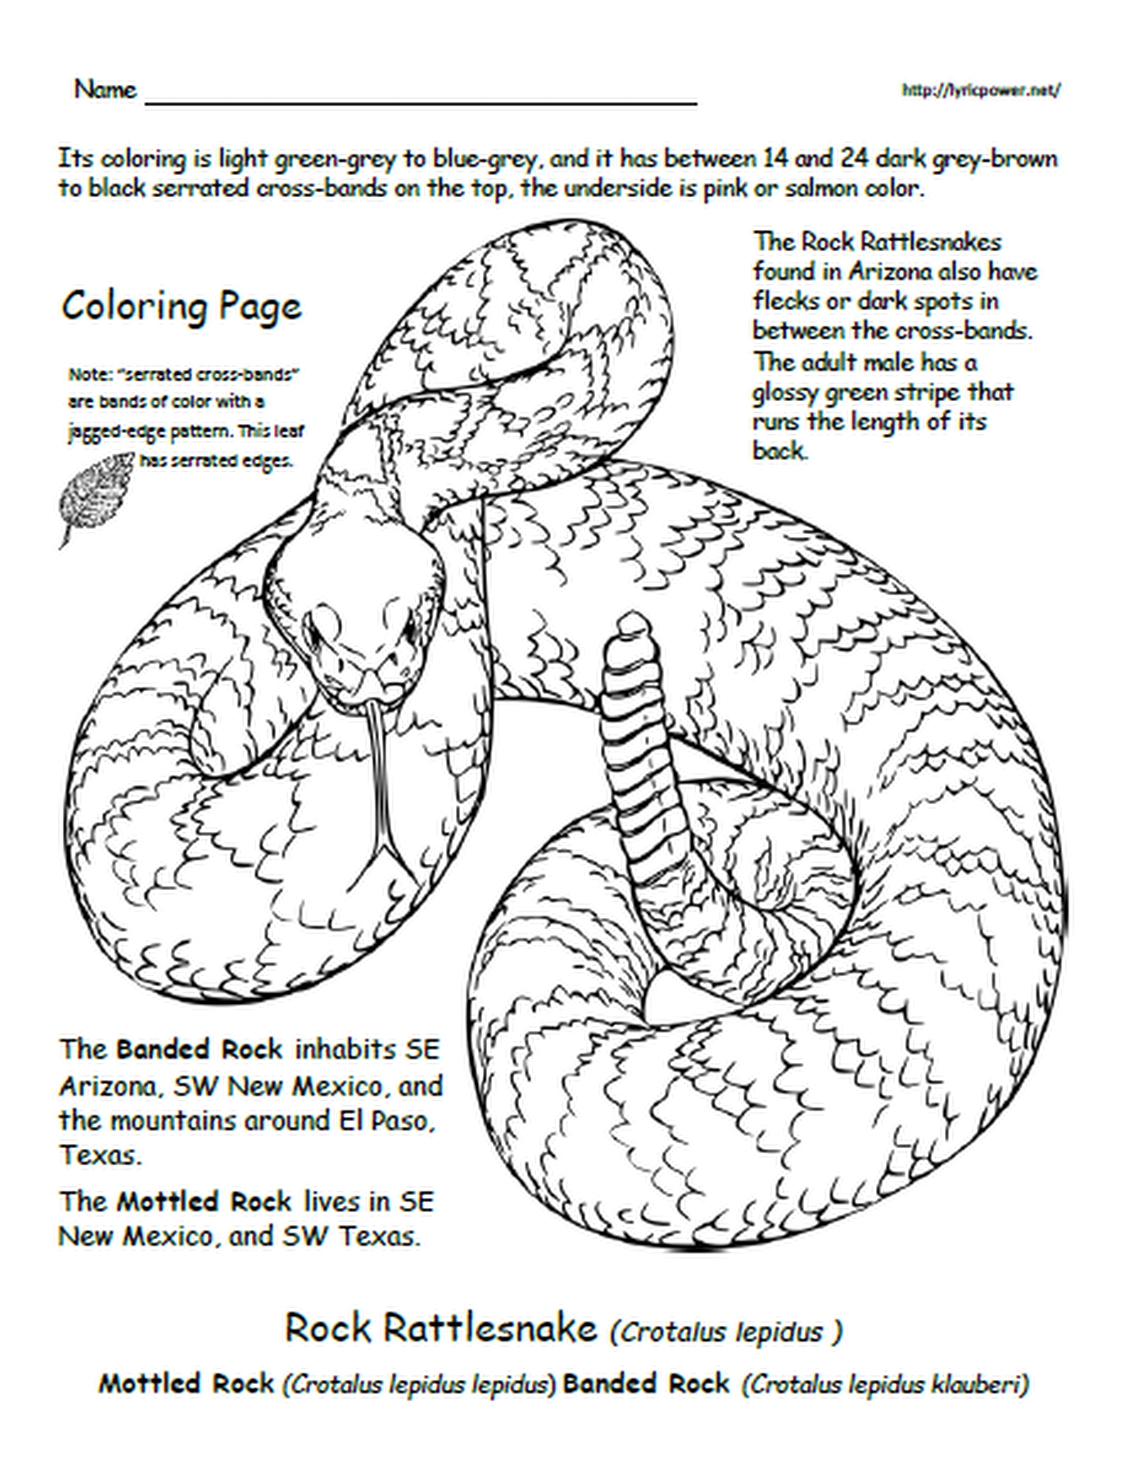 Black and white sketch of a rattlesnake, coloring page, description of a Rock Rattlesnake